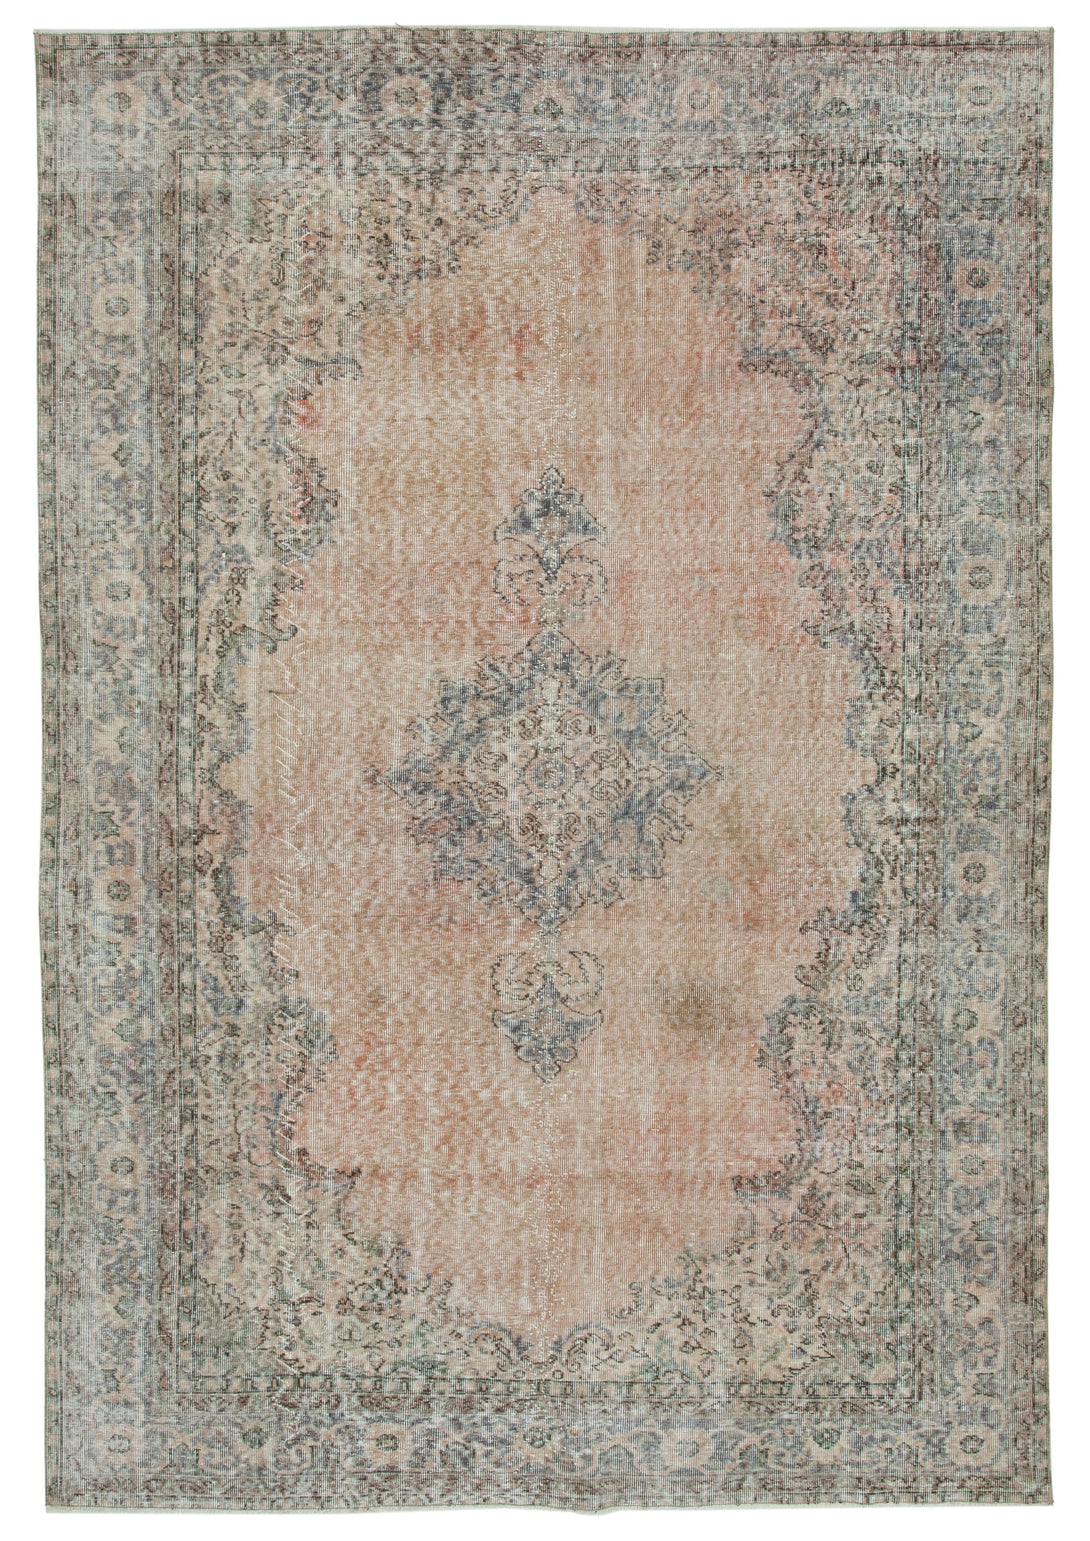 Handmade White Wash Area Rug > Design# OL-AC-34021 > Size: 6'-11" x 10'-4", Carpet Culture Rugs, Handmade Rugs, NYC Rugs, New Rugs, Shop Rugs, Rug Store, Outlet Rugs, SoHo Rugs, Rugs in USA